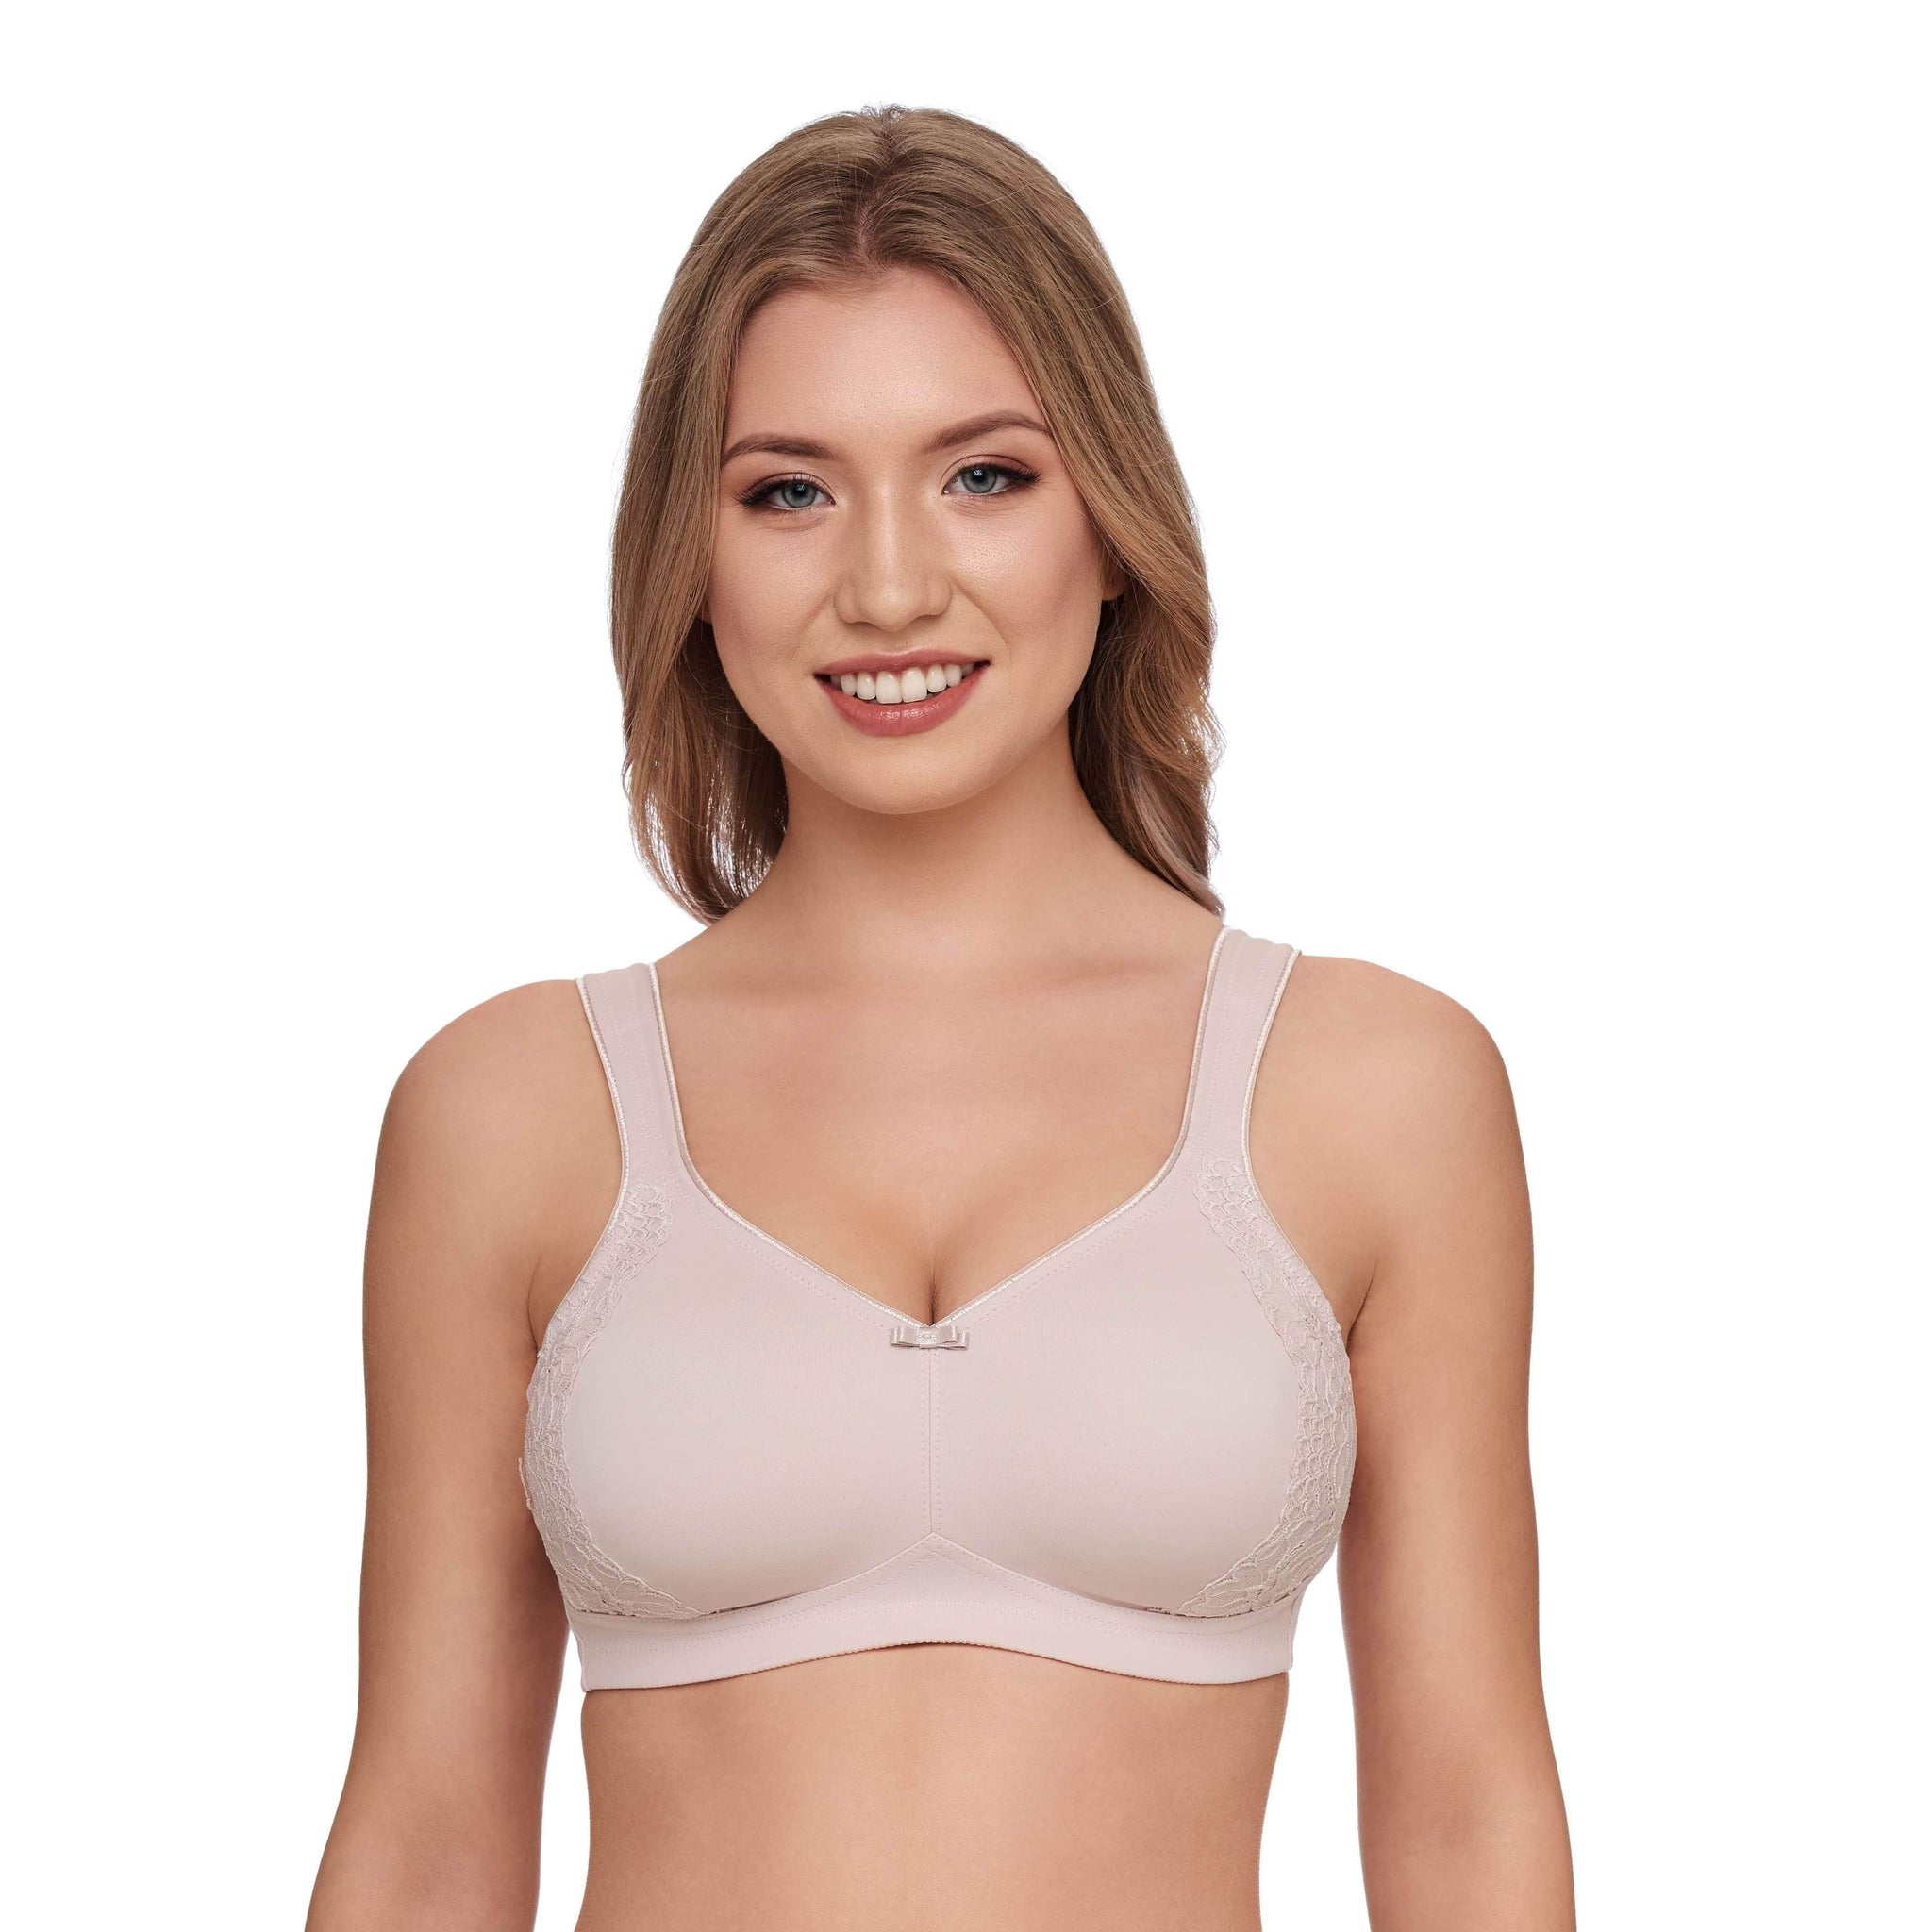 SUSA 8145-3 Women's London White Floral Embroidered Non-Wired Soft Bra 36D  at  Women's Clothing store